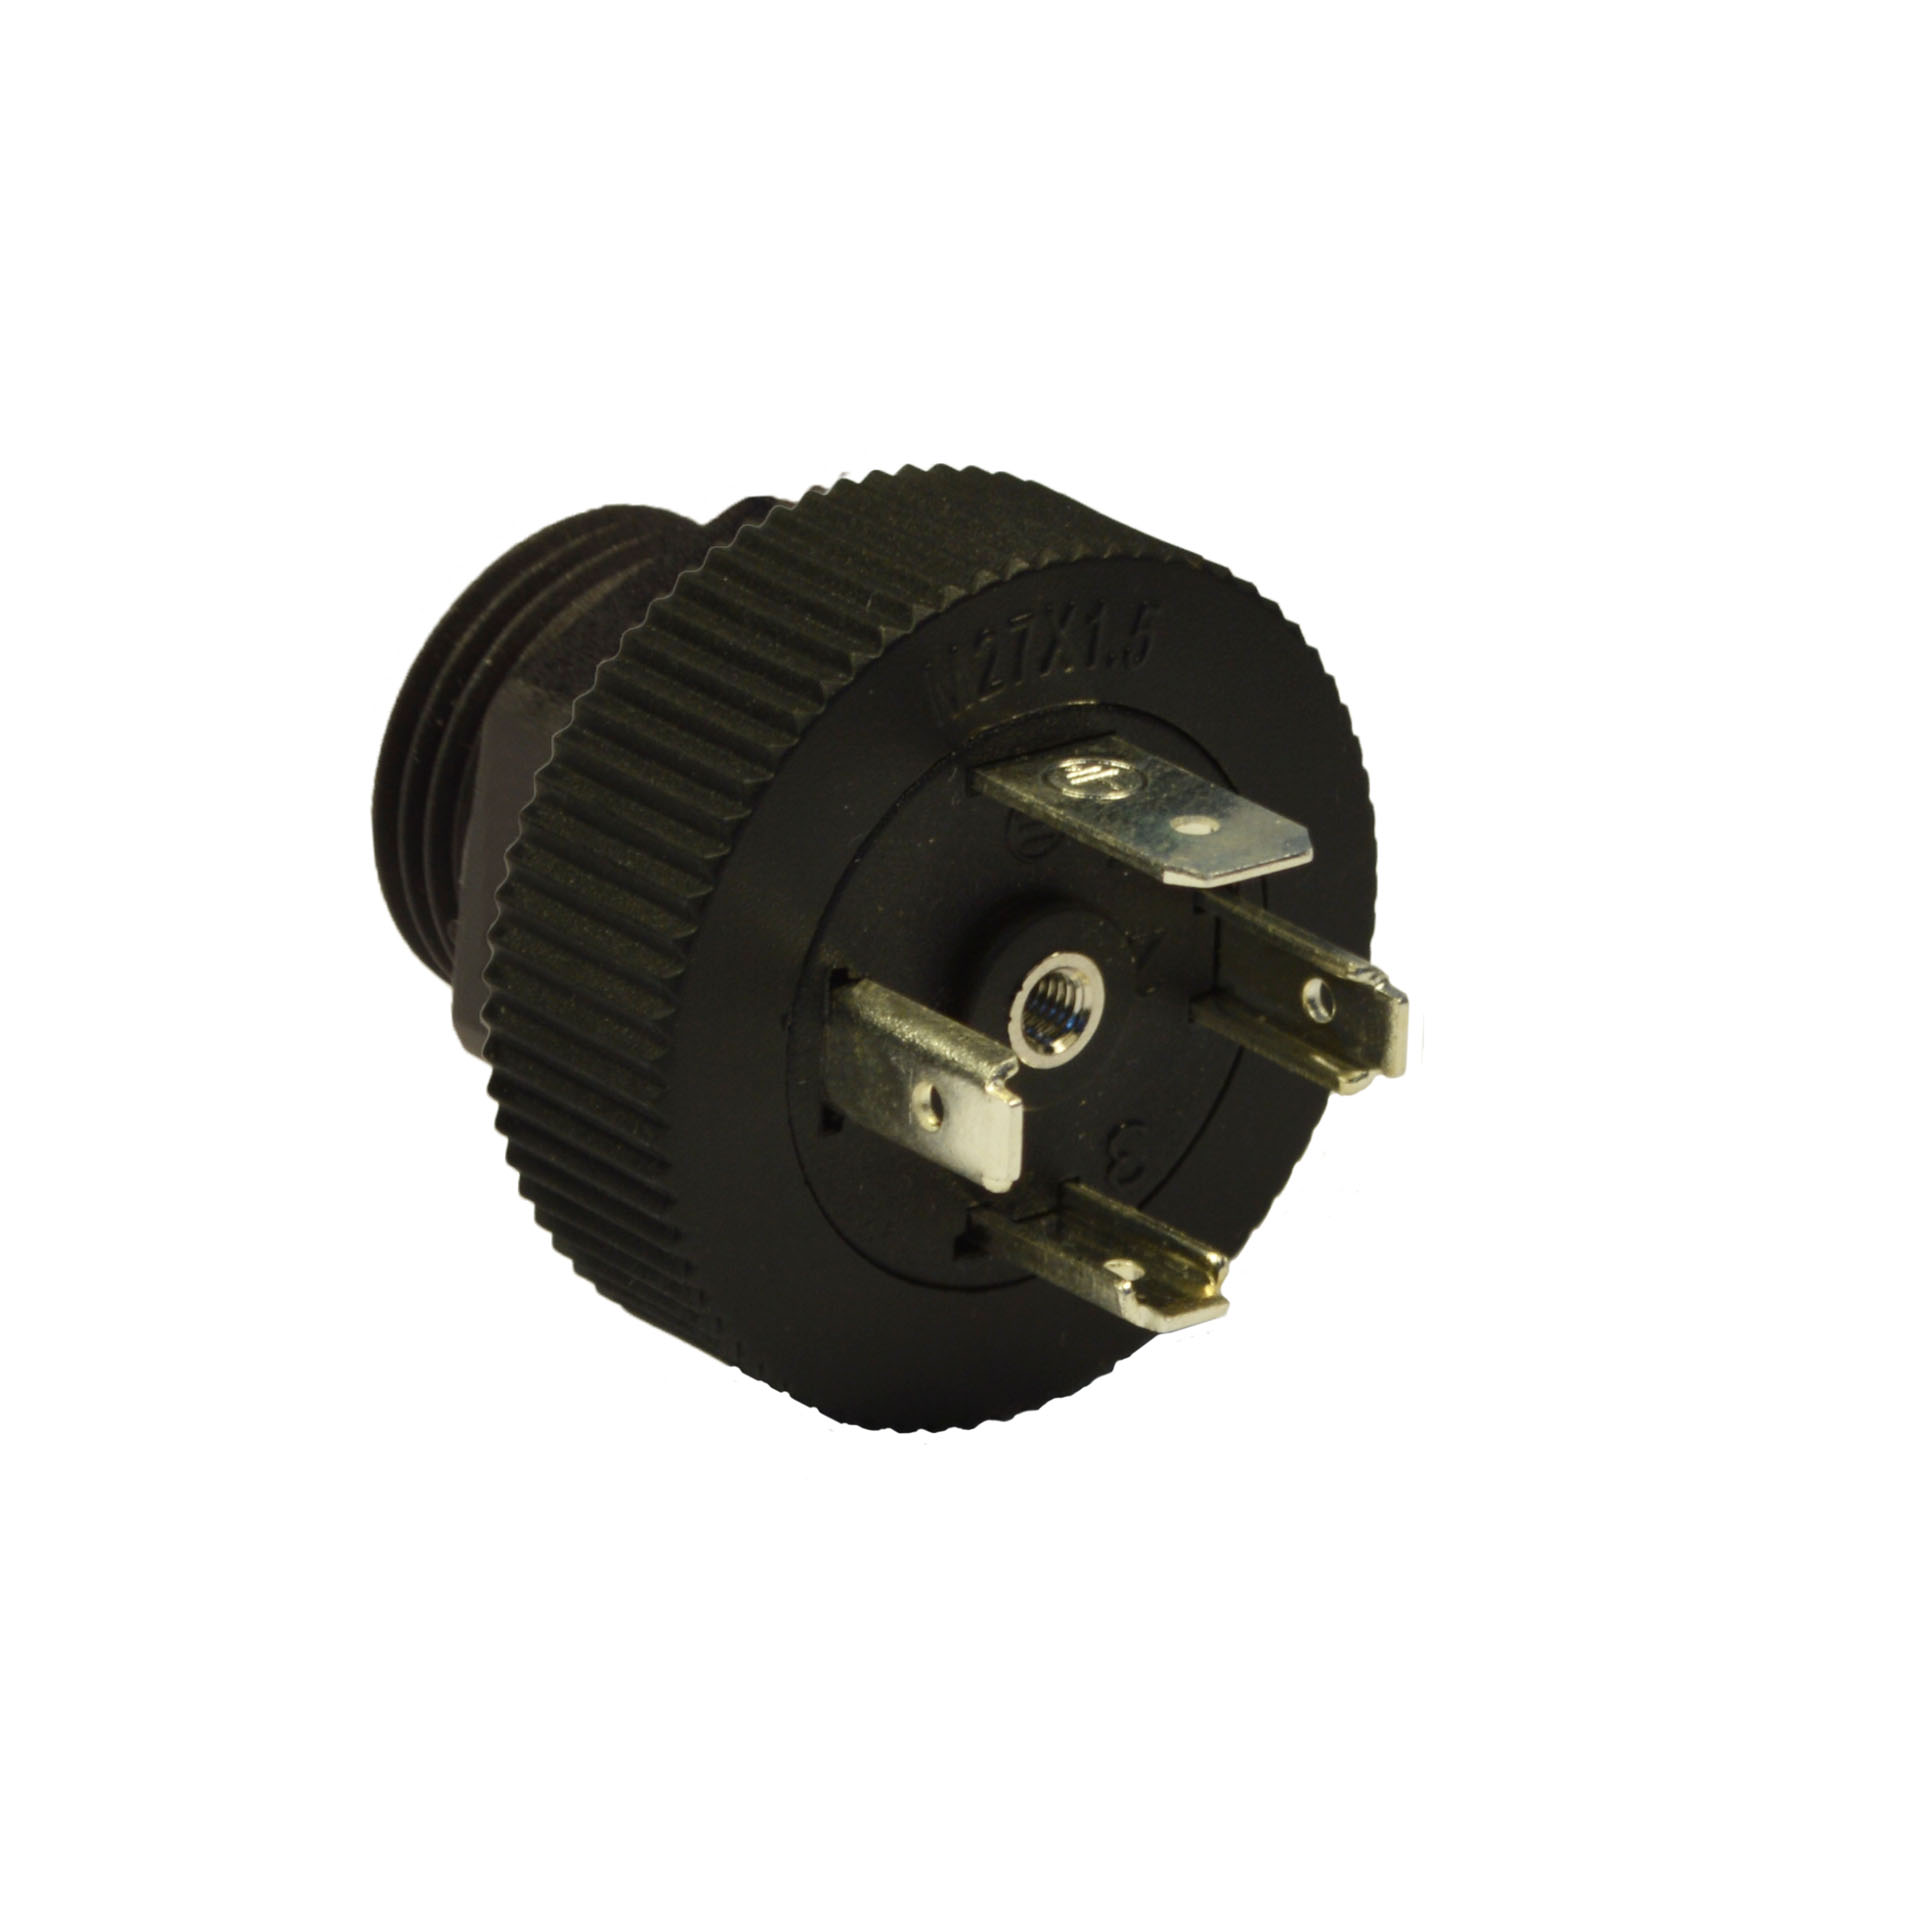 EN175301-803(typeC)Round BASE,3p+PE,250VAC/300VDC,M27x1,5 fix nut+M20 adaptor,M3 central nut OPEN